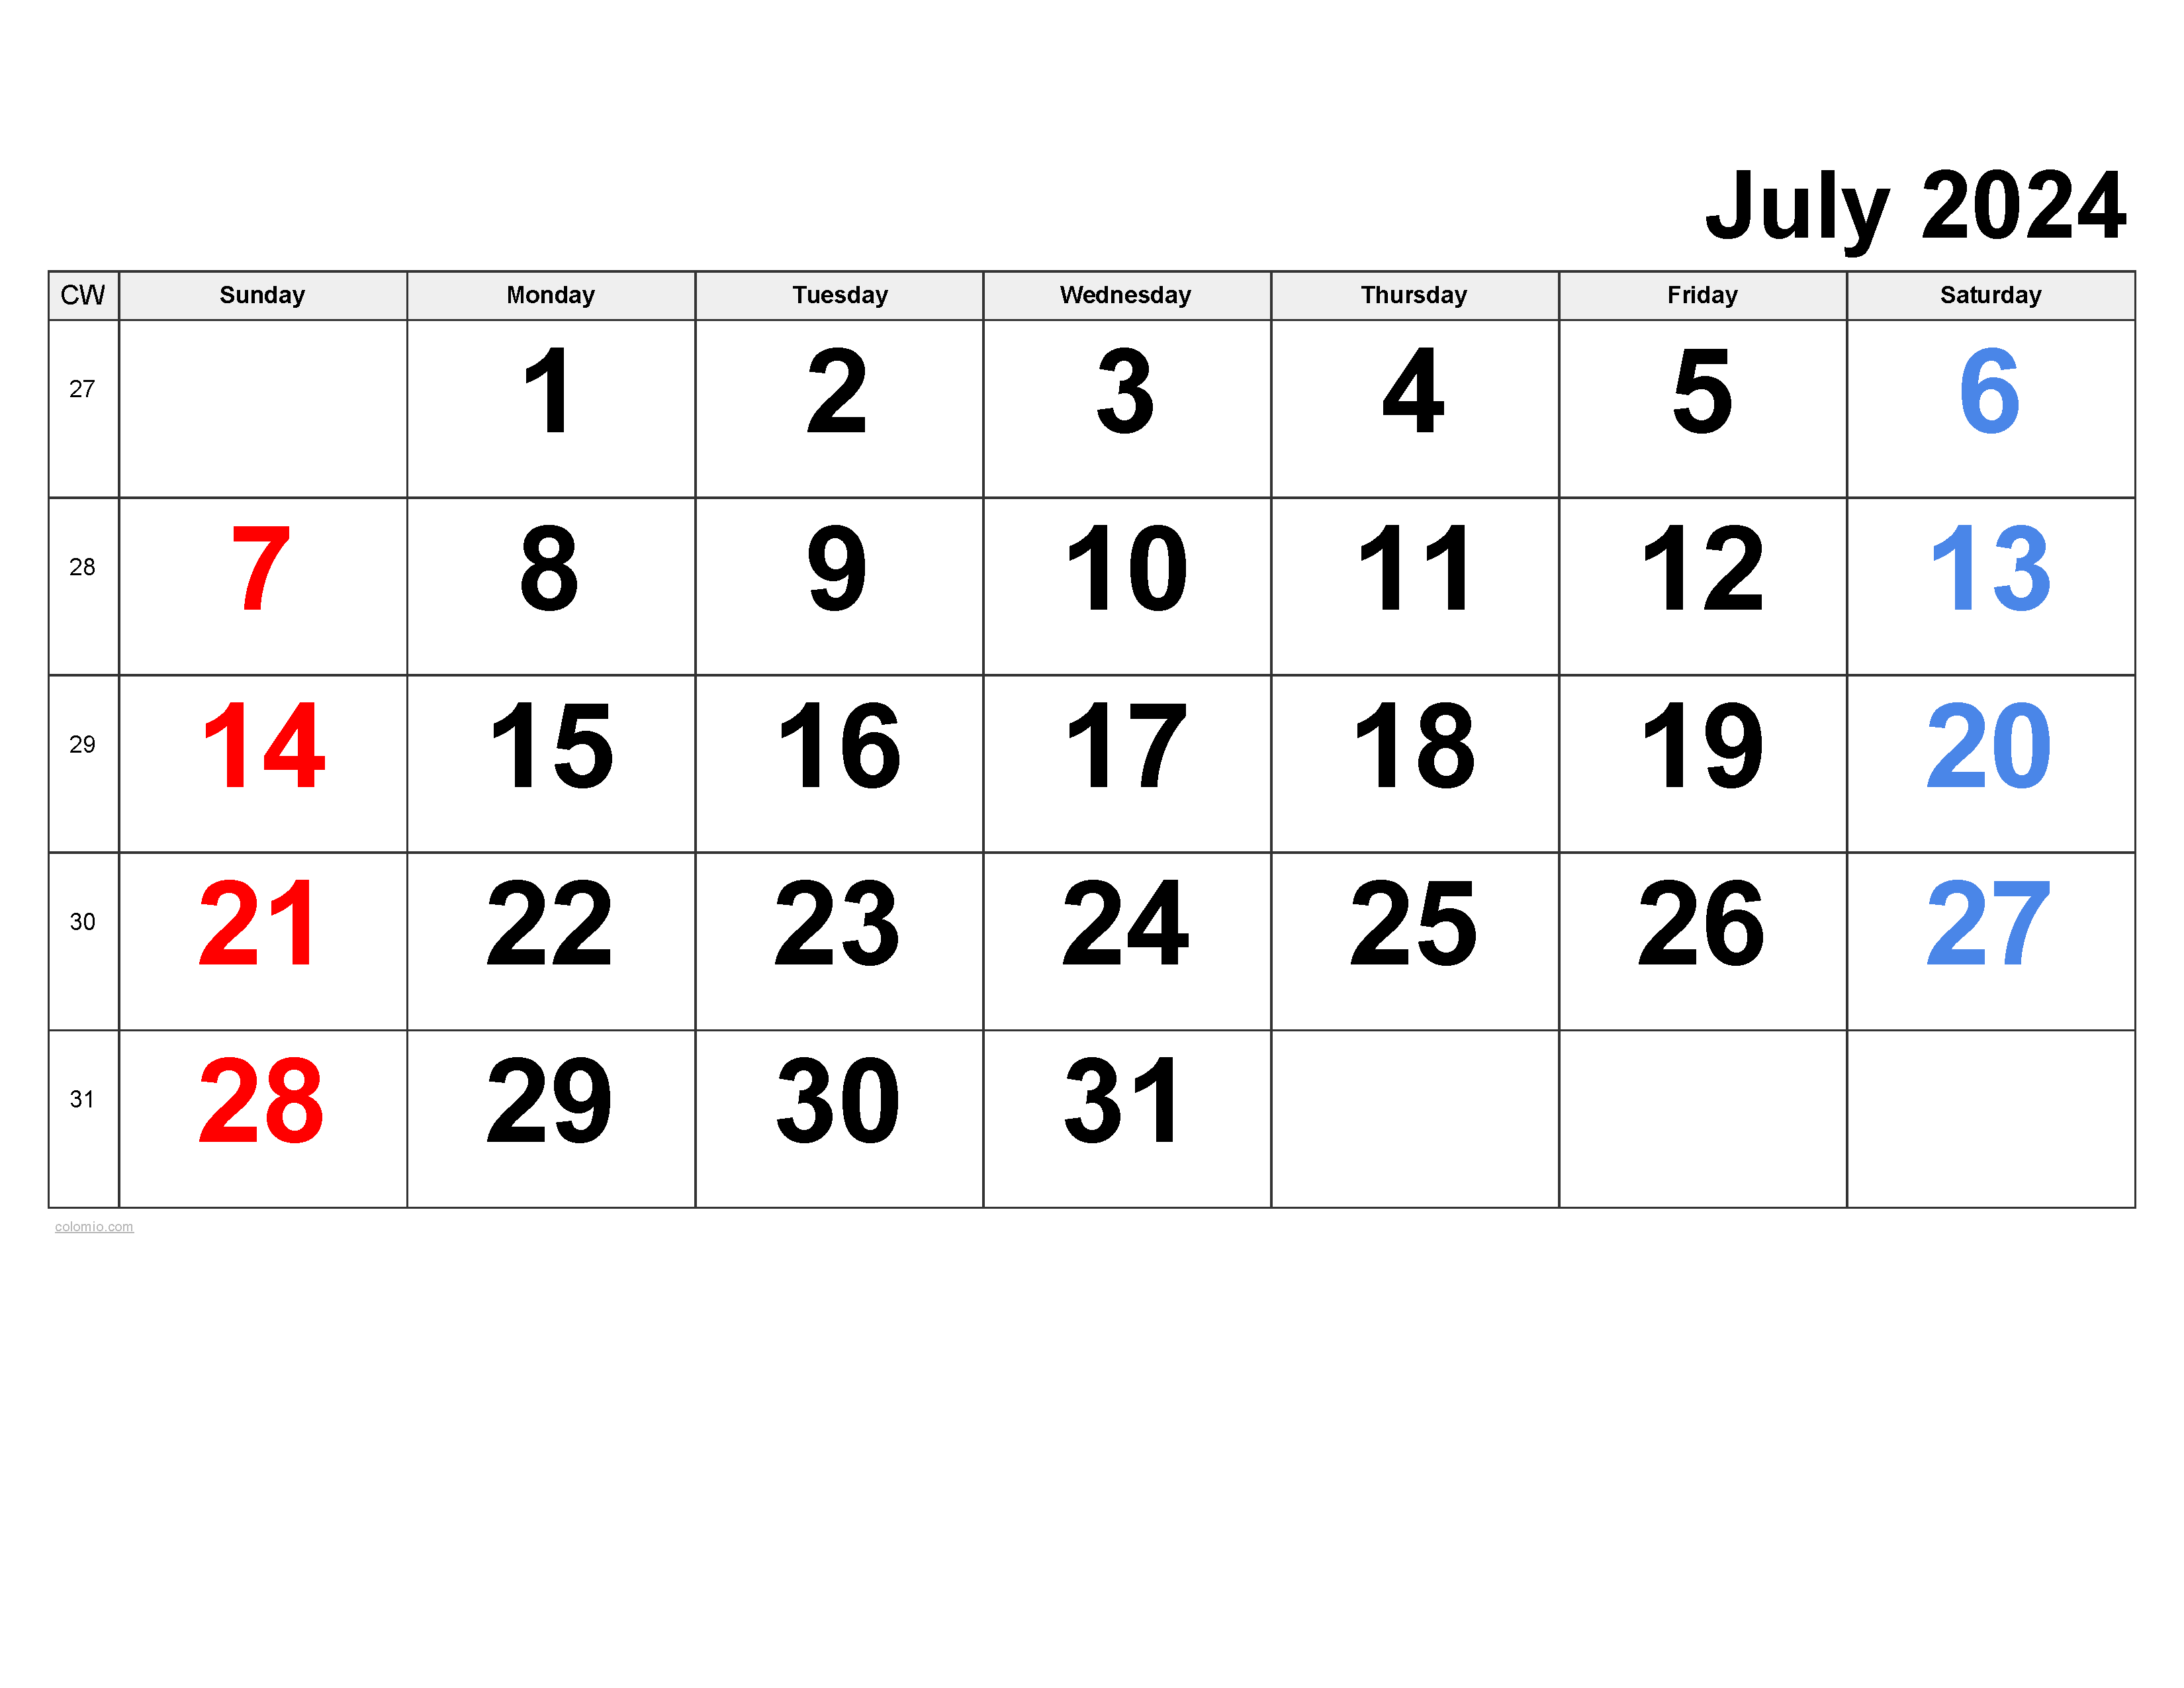 July 2024 Calendar | Free Printable Pdf, Xls And Png in Calendar 2024 July